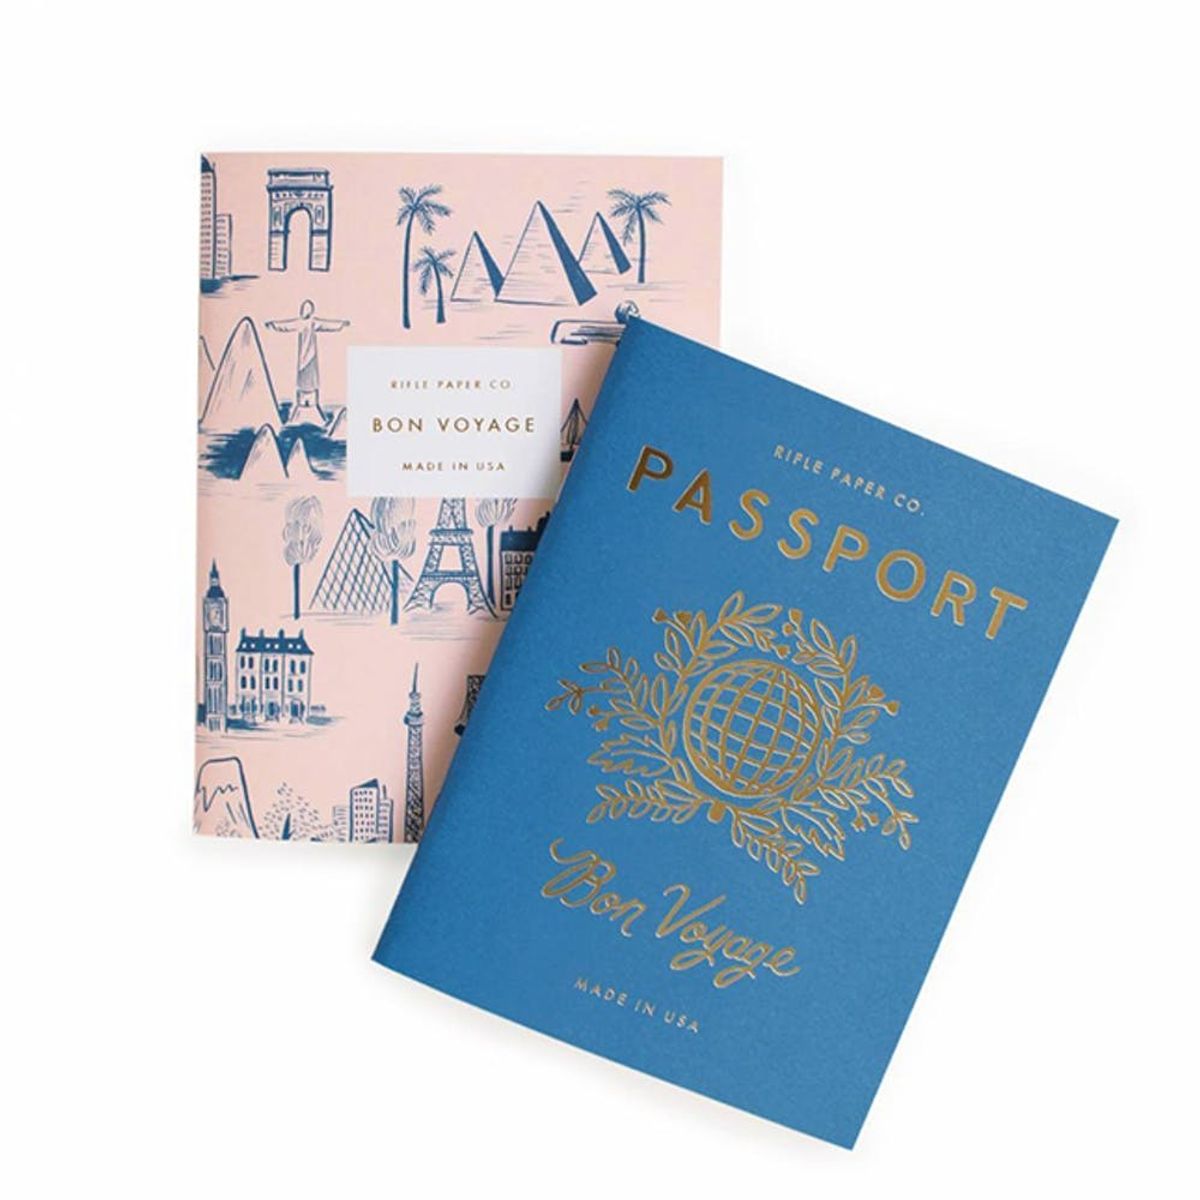 14 Gifts Perfect for Your Jet-Setting BFF